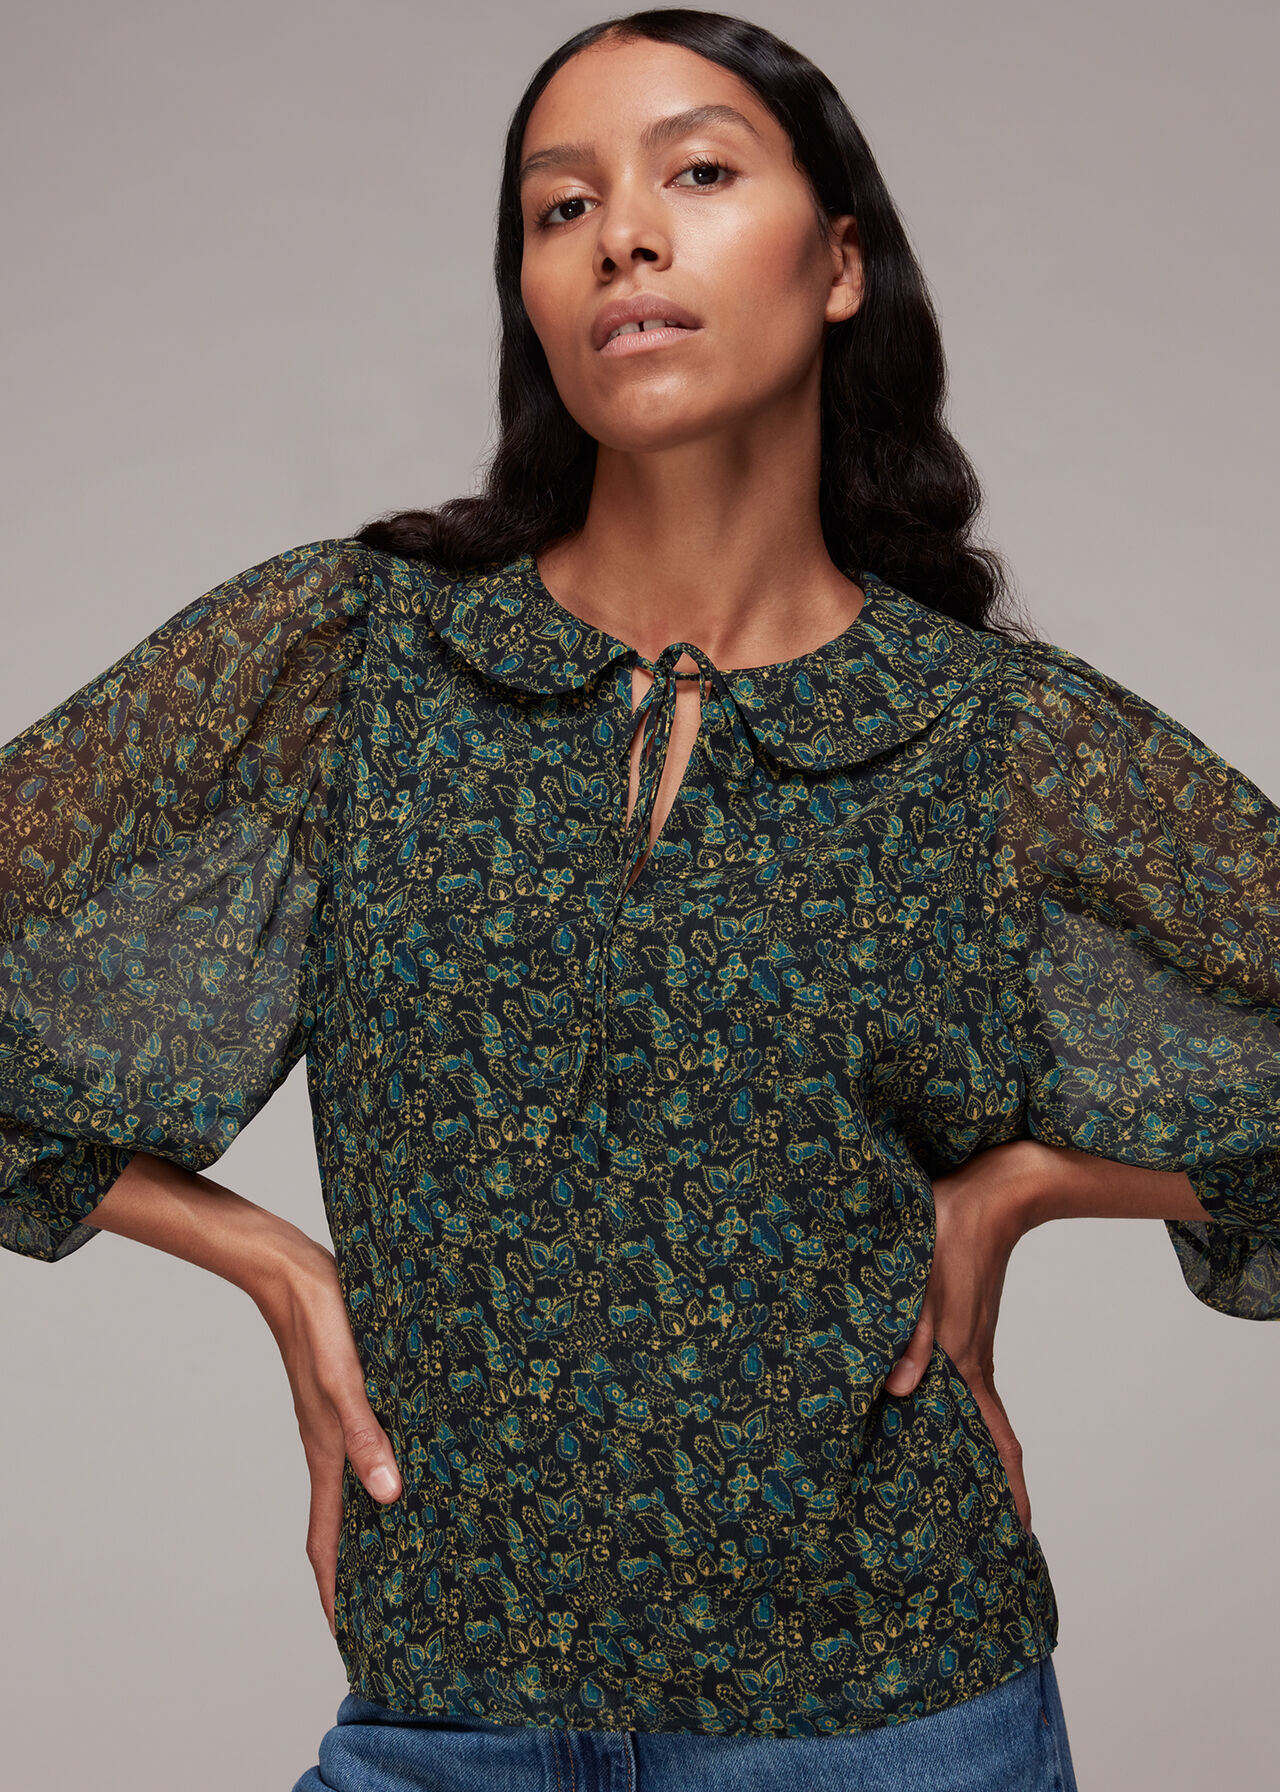 Stitched Floral Amoura Top